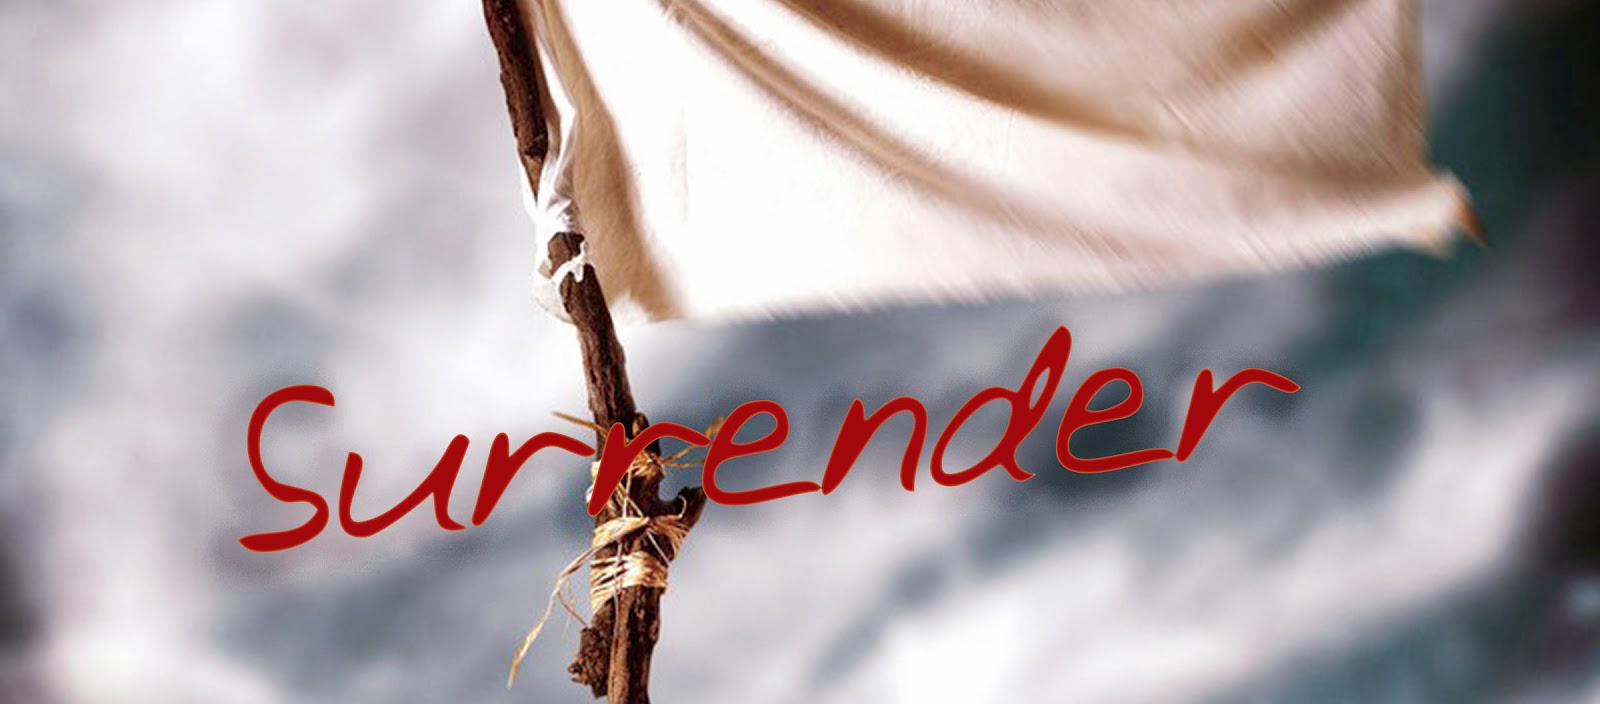 Surrender Meaning and Definition